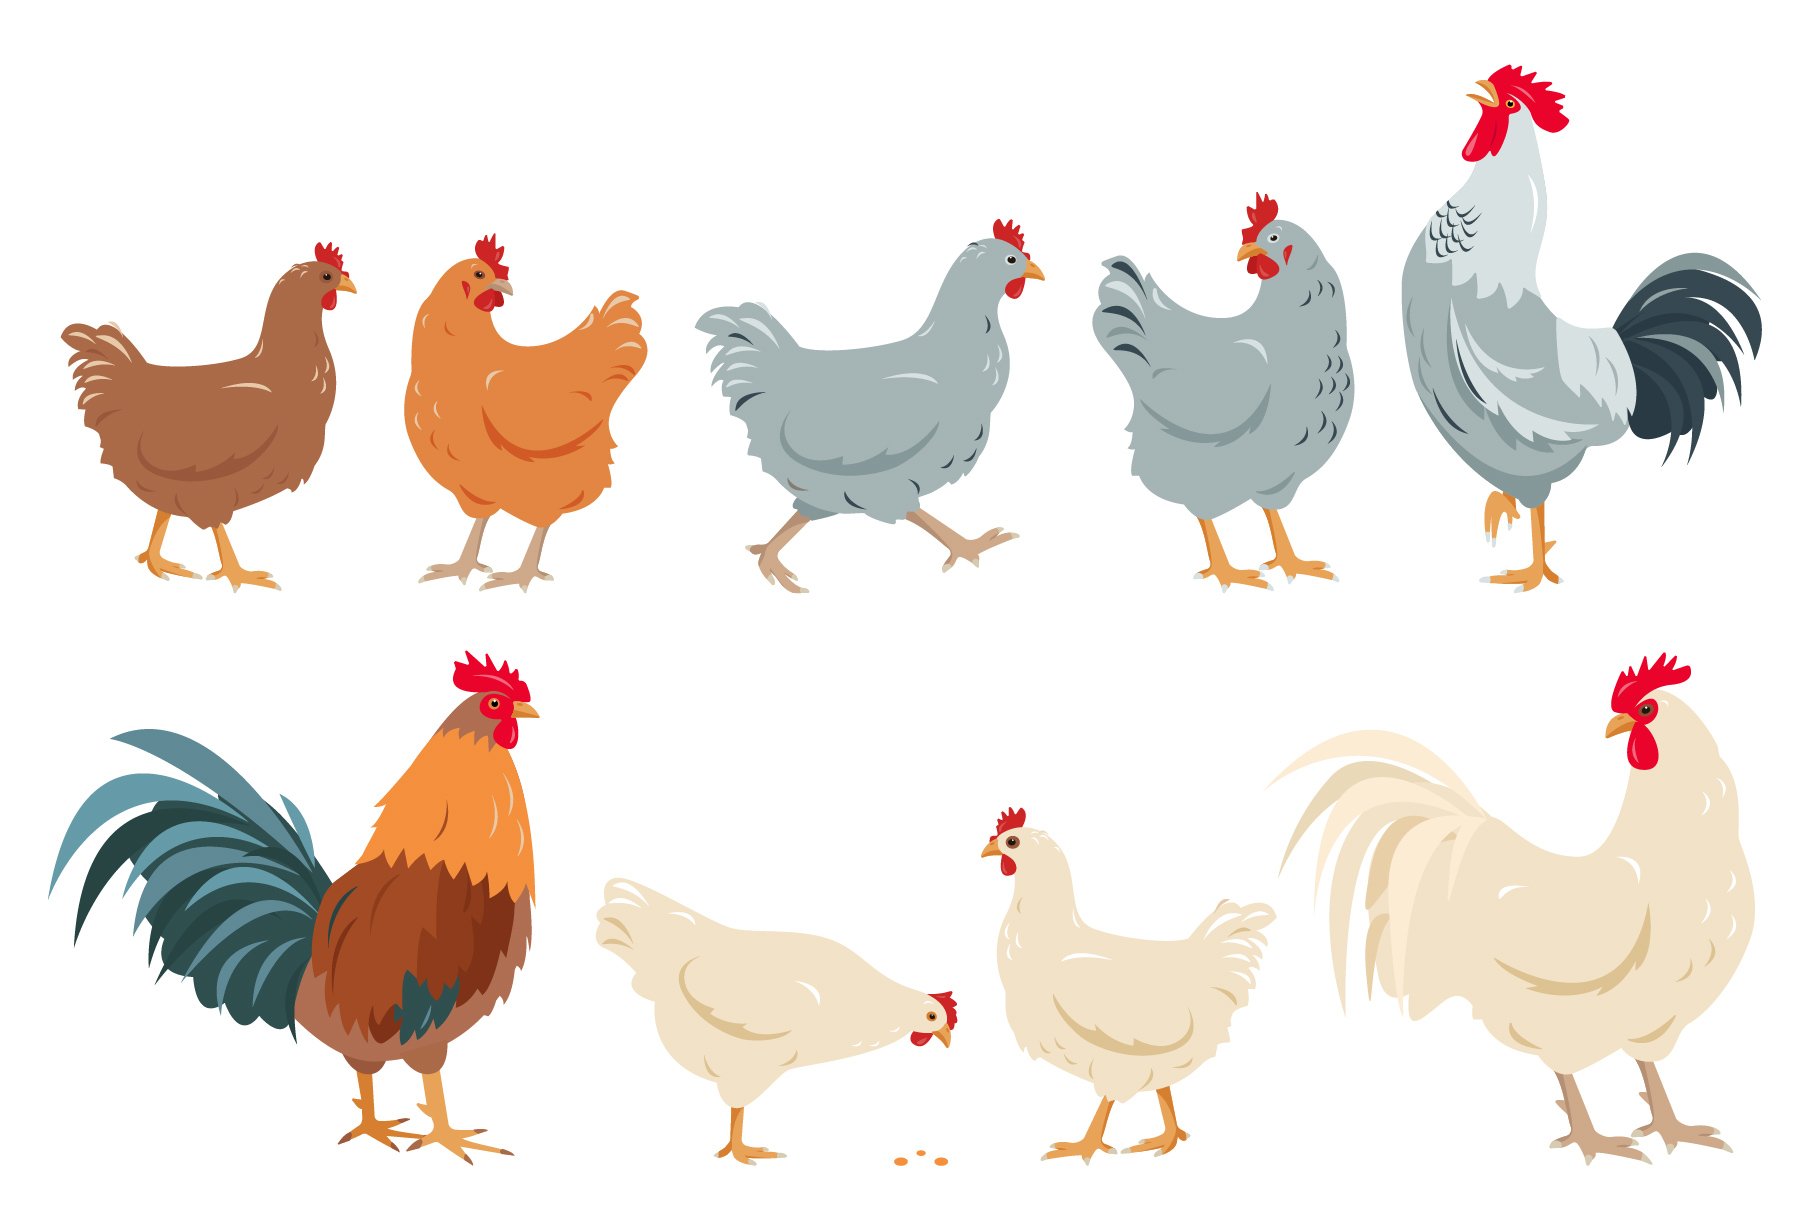 Hens, Chicks and Roosters preview image.